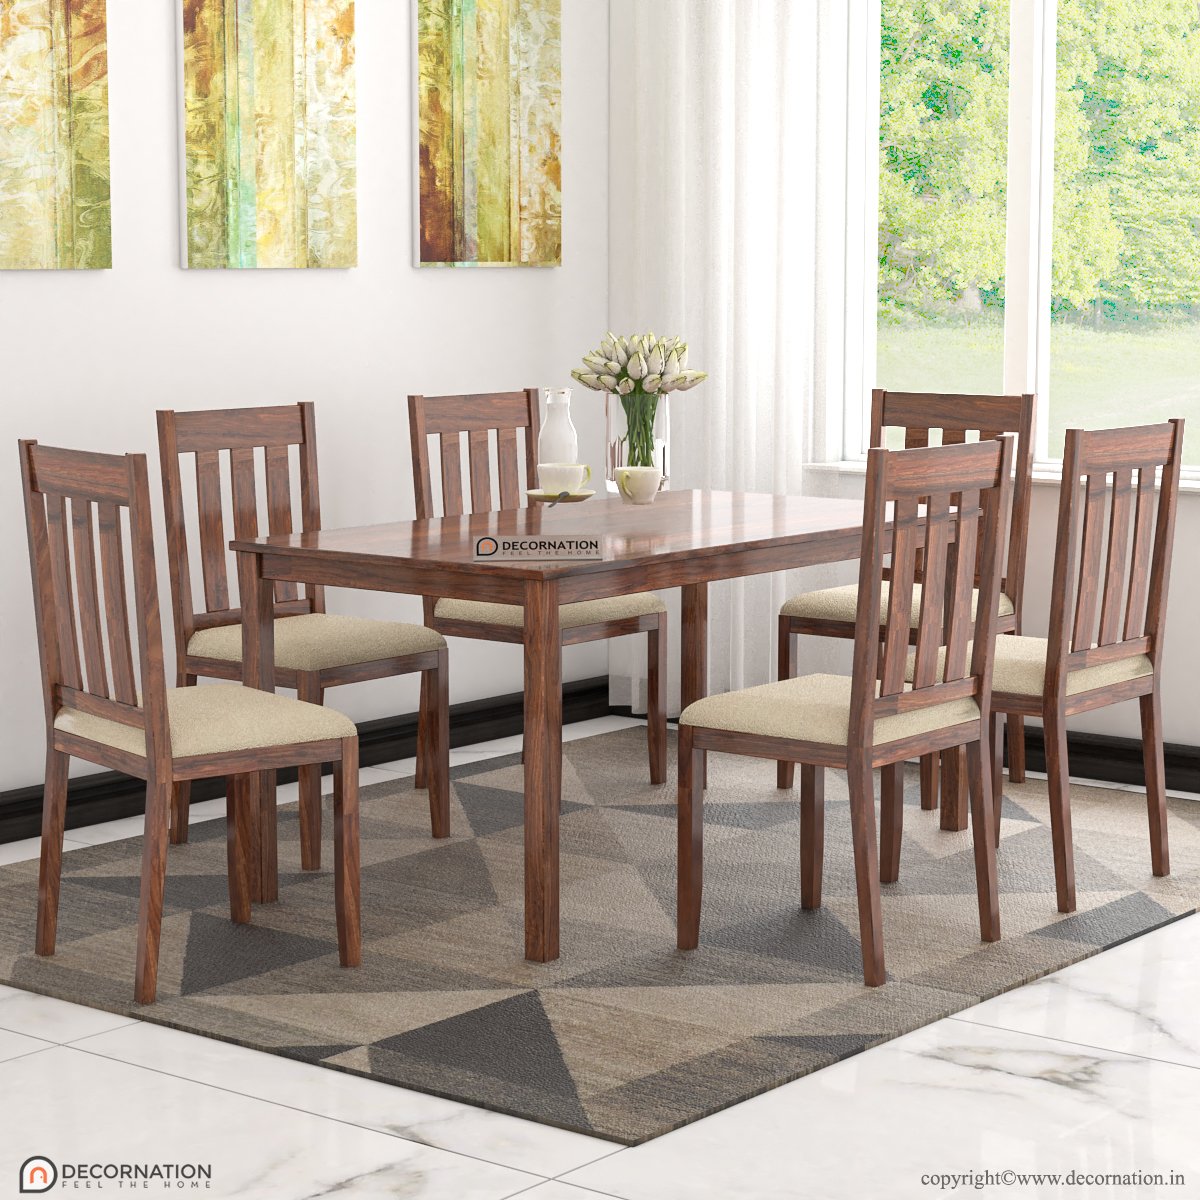 Damme Wooden 6 Seater Dining Table Set